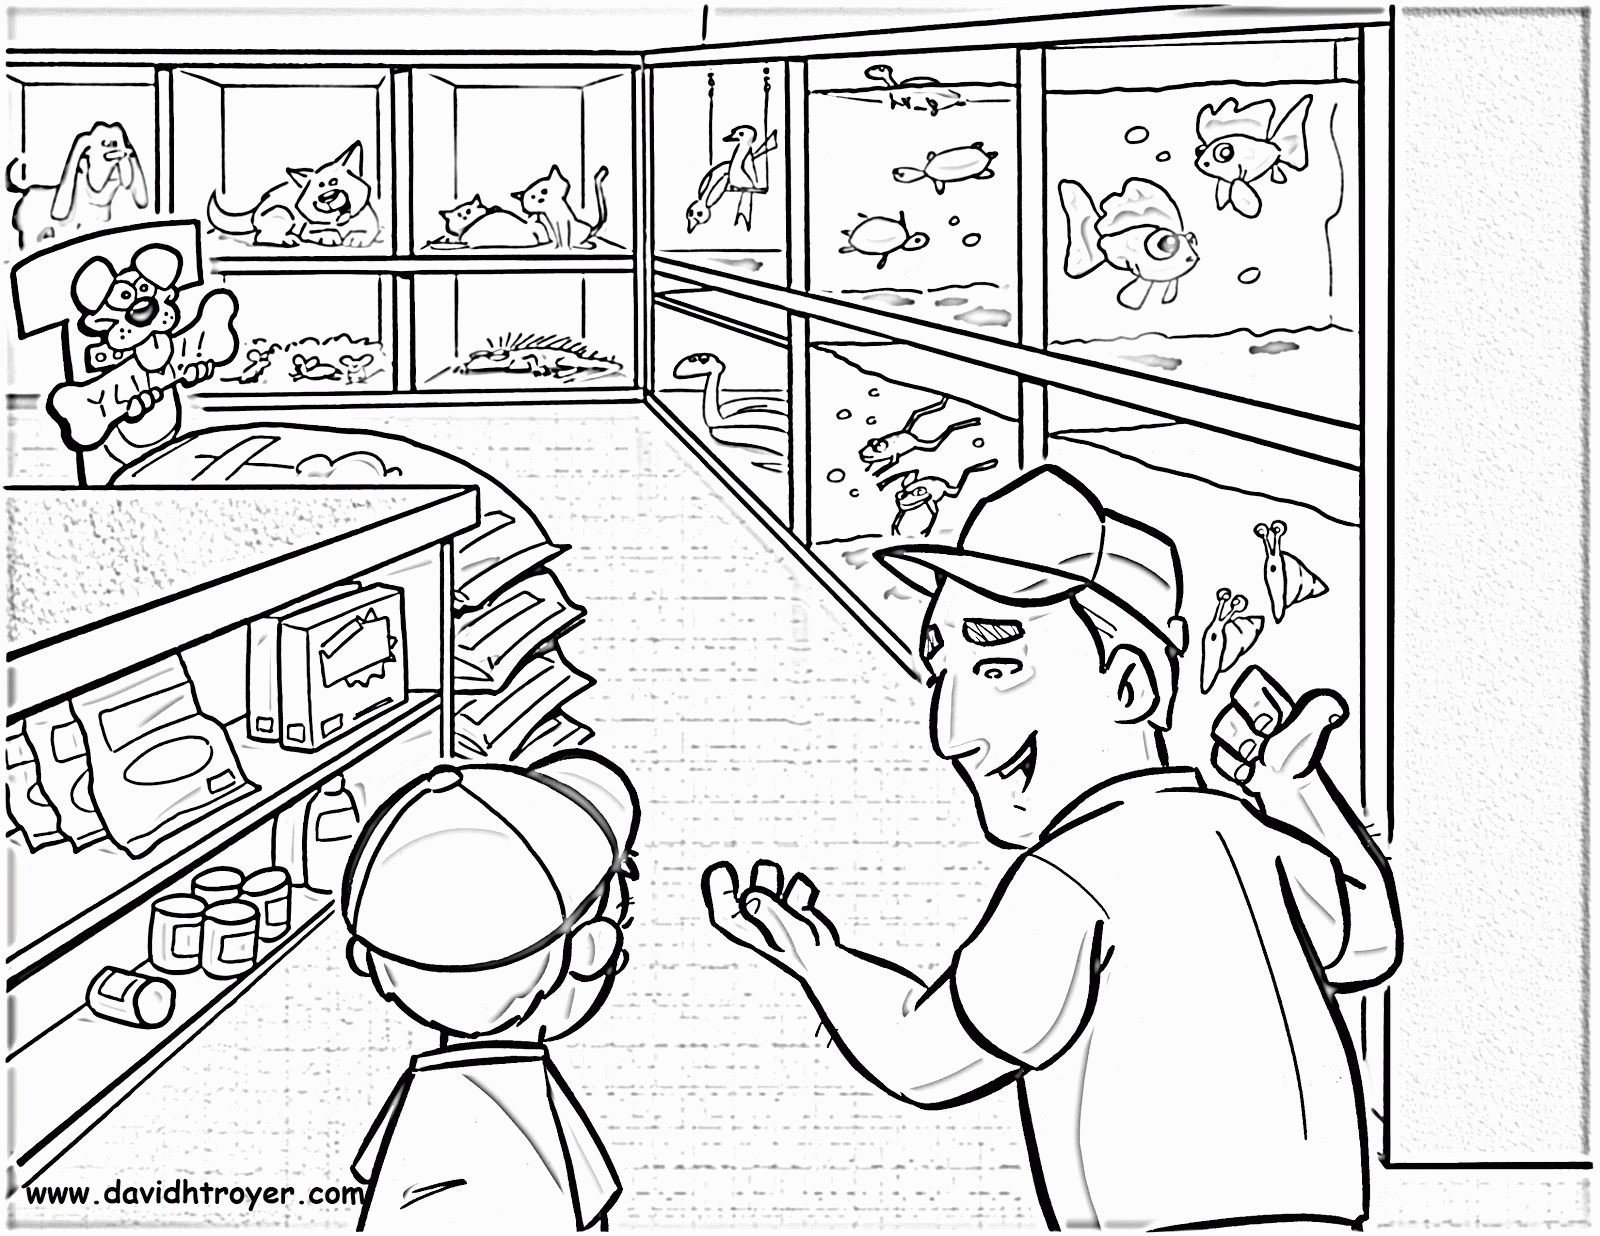 Download Pet Store Coloring Pages - Coloring Home